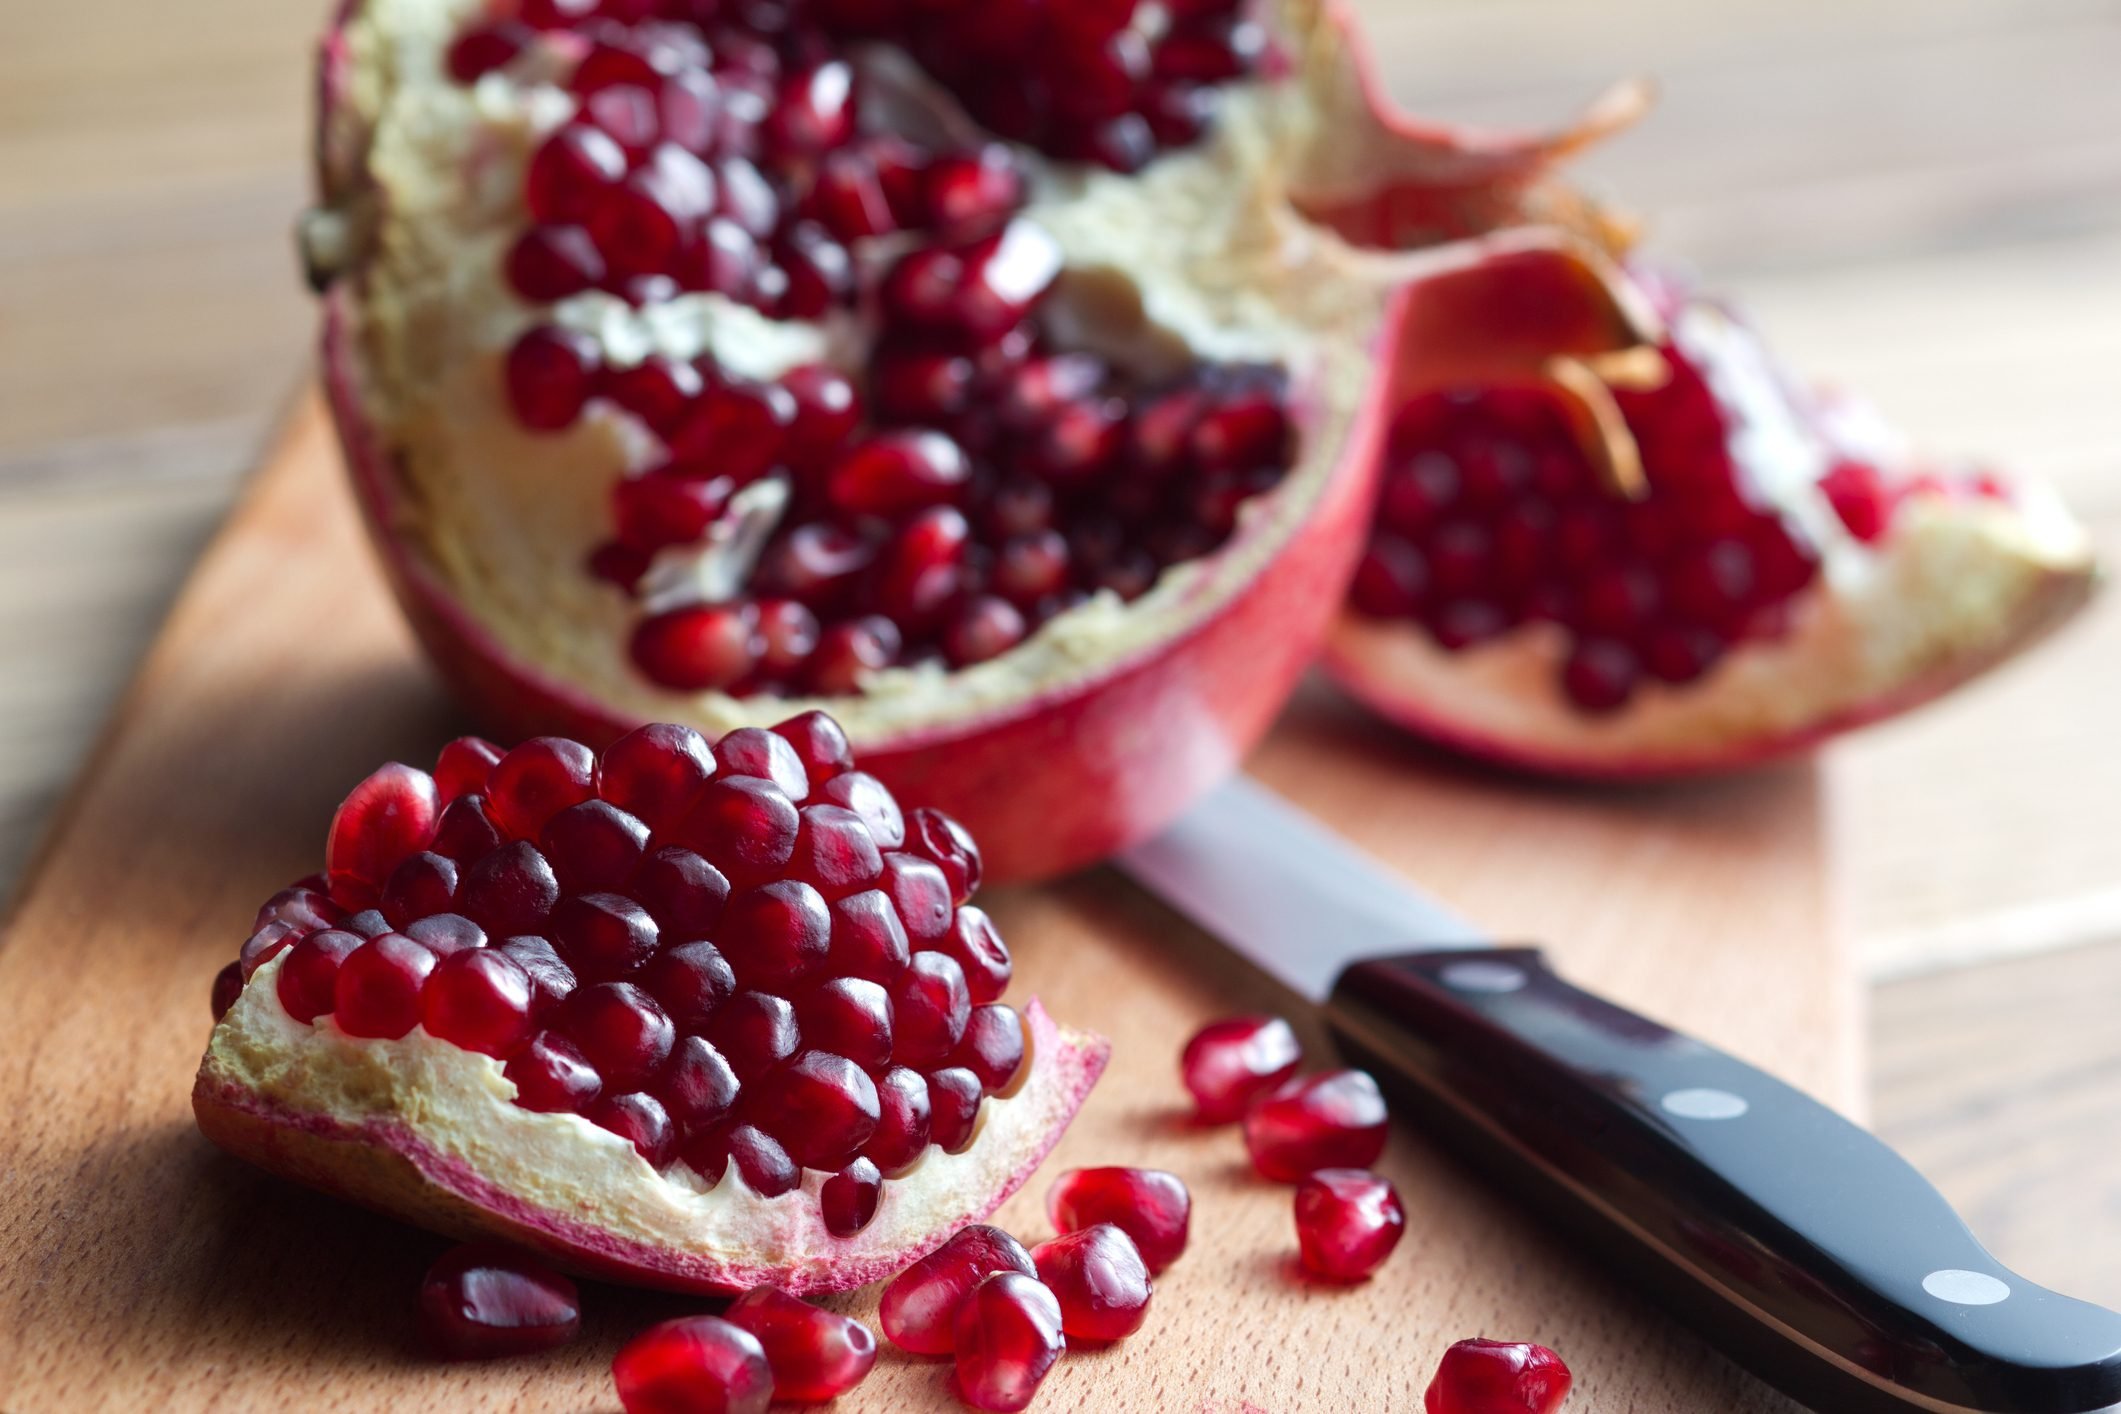 showing how to remove seeds from a pomegranate on cutting board